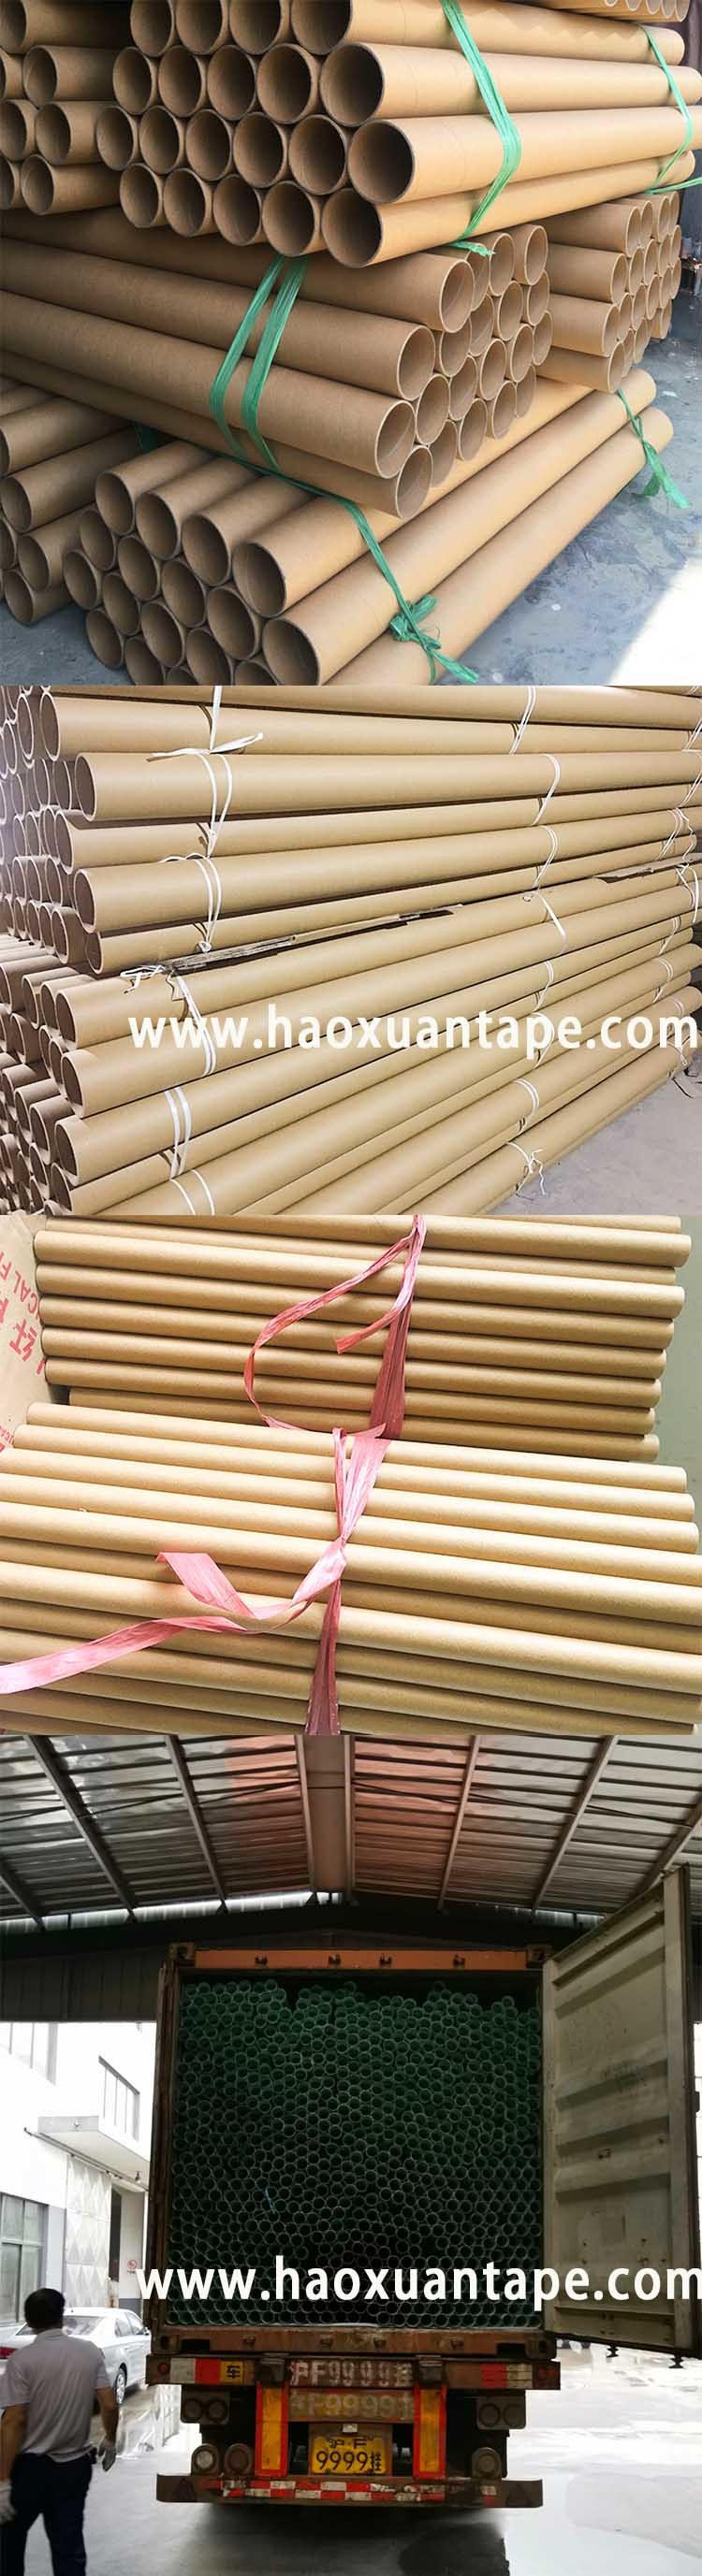 China Biggest Toilet Paper Roll Tube Core Manufacturer